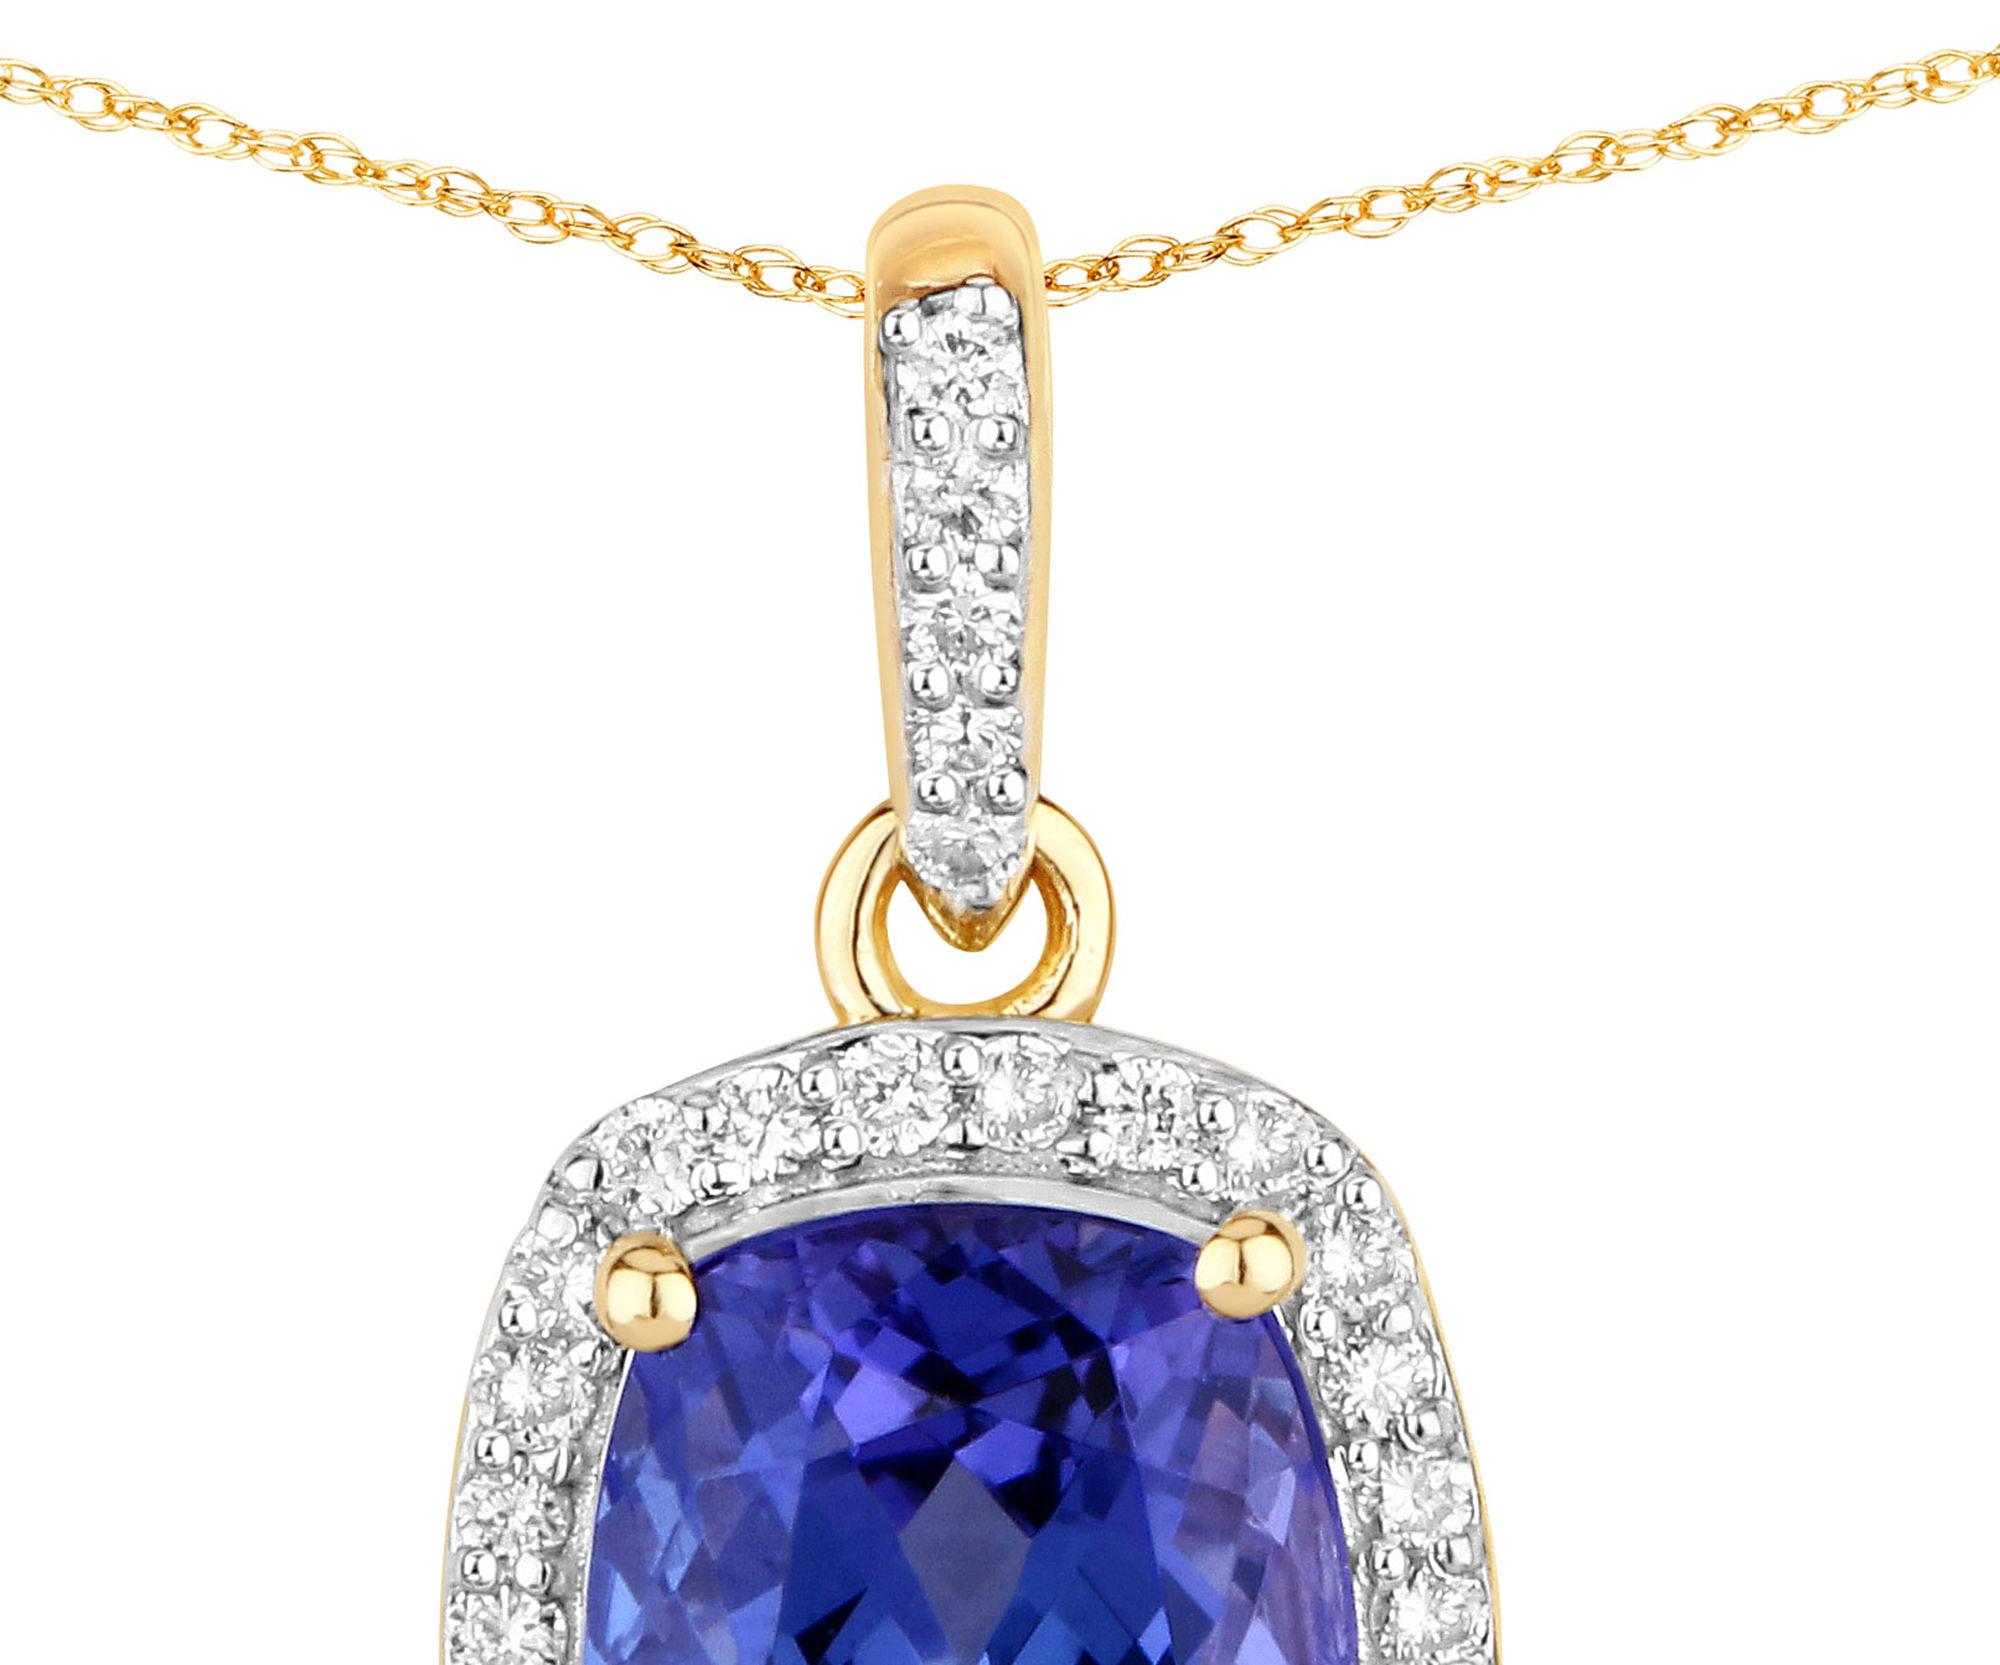 It comes with the appraisal by GIA GG/AJP
All Gemstones are Natural
Cushion Cut Tanzanite = 2.35 Carat
33 Round Diamonds = 0.15 Carats
Metal: 14K Gold